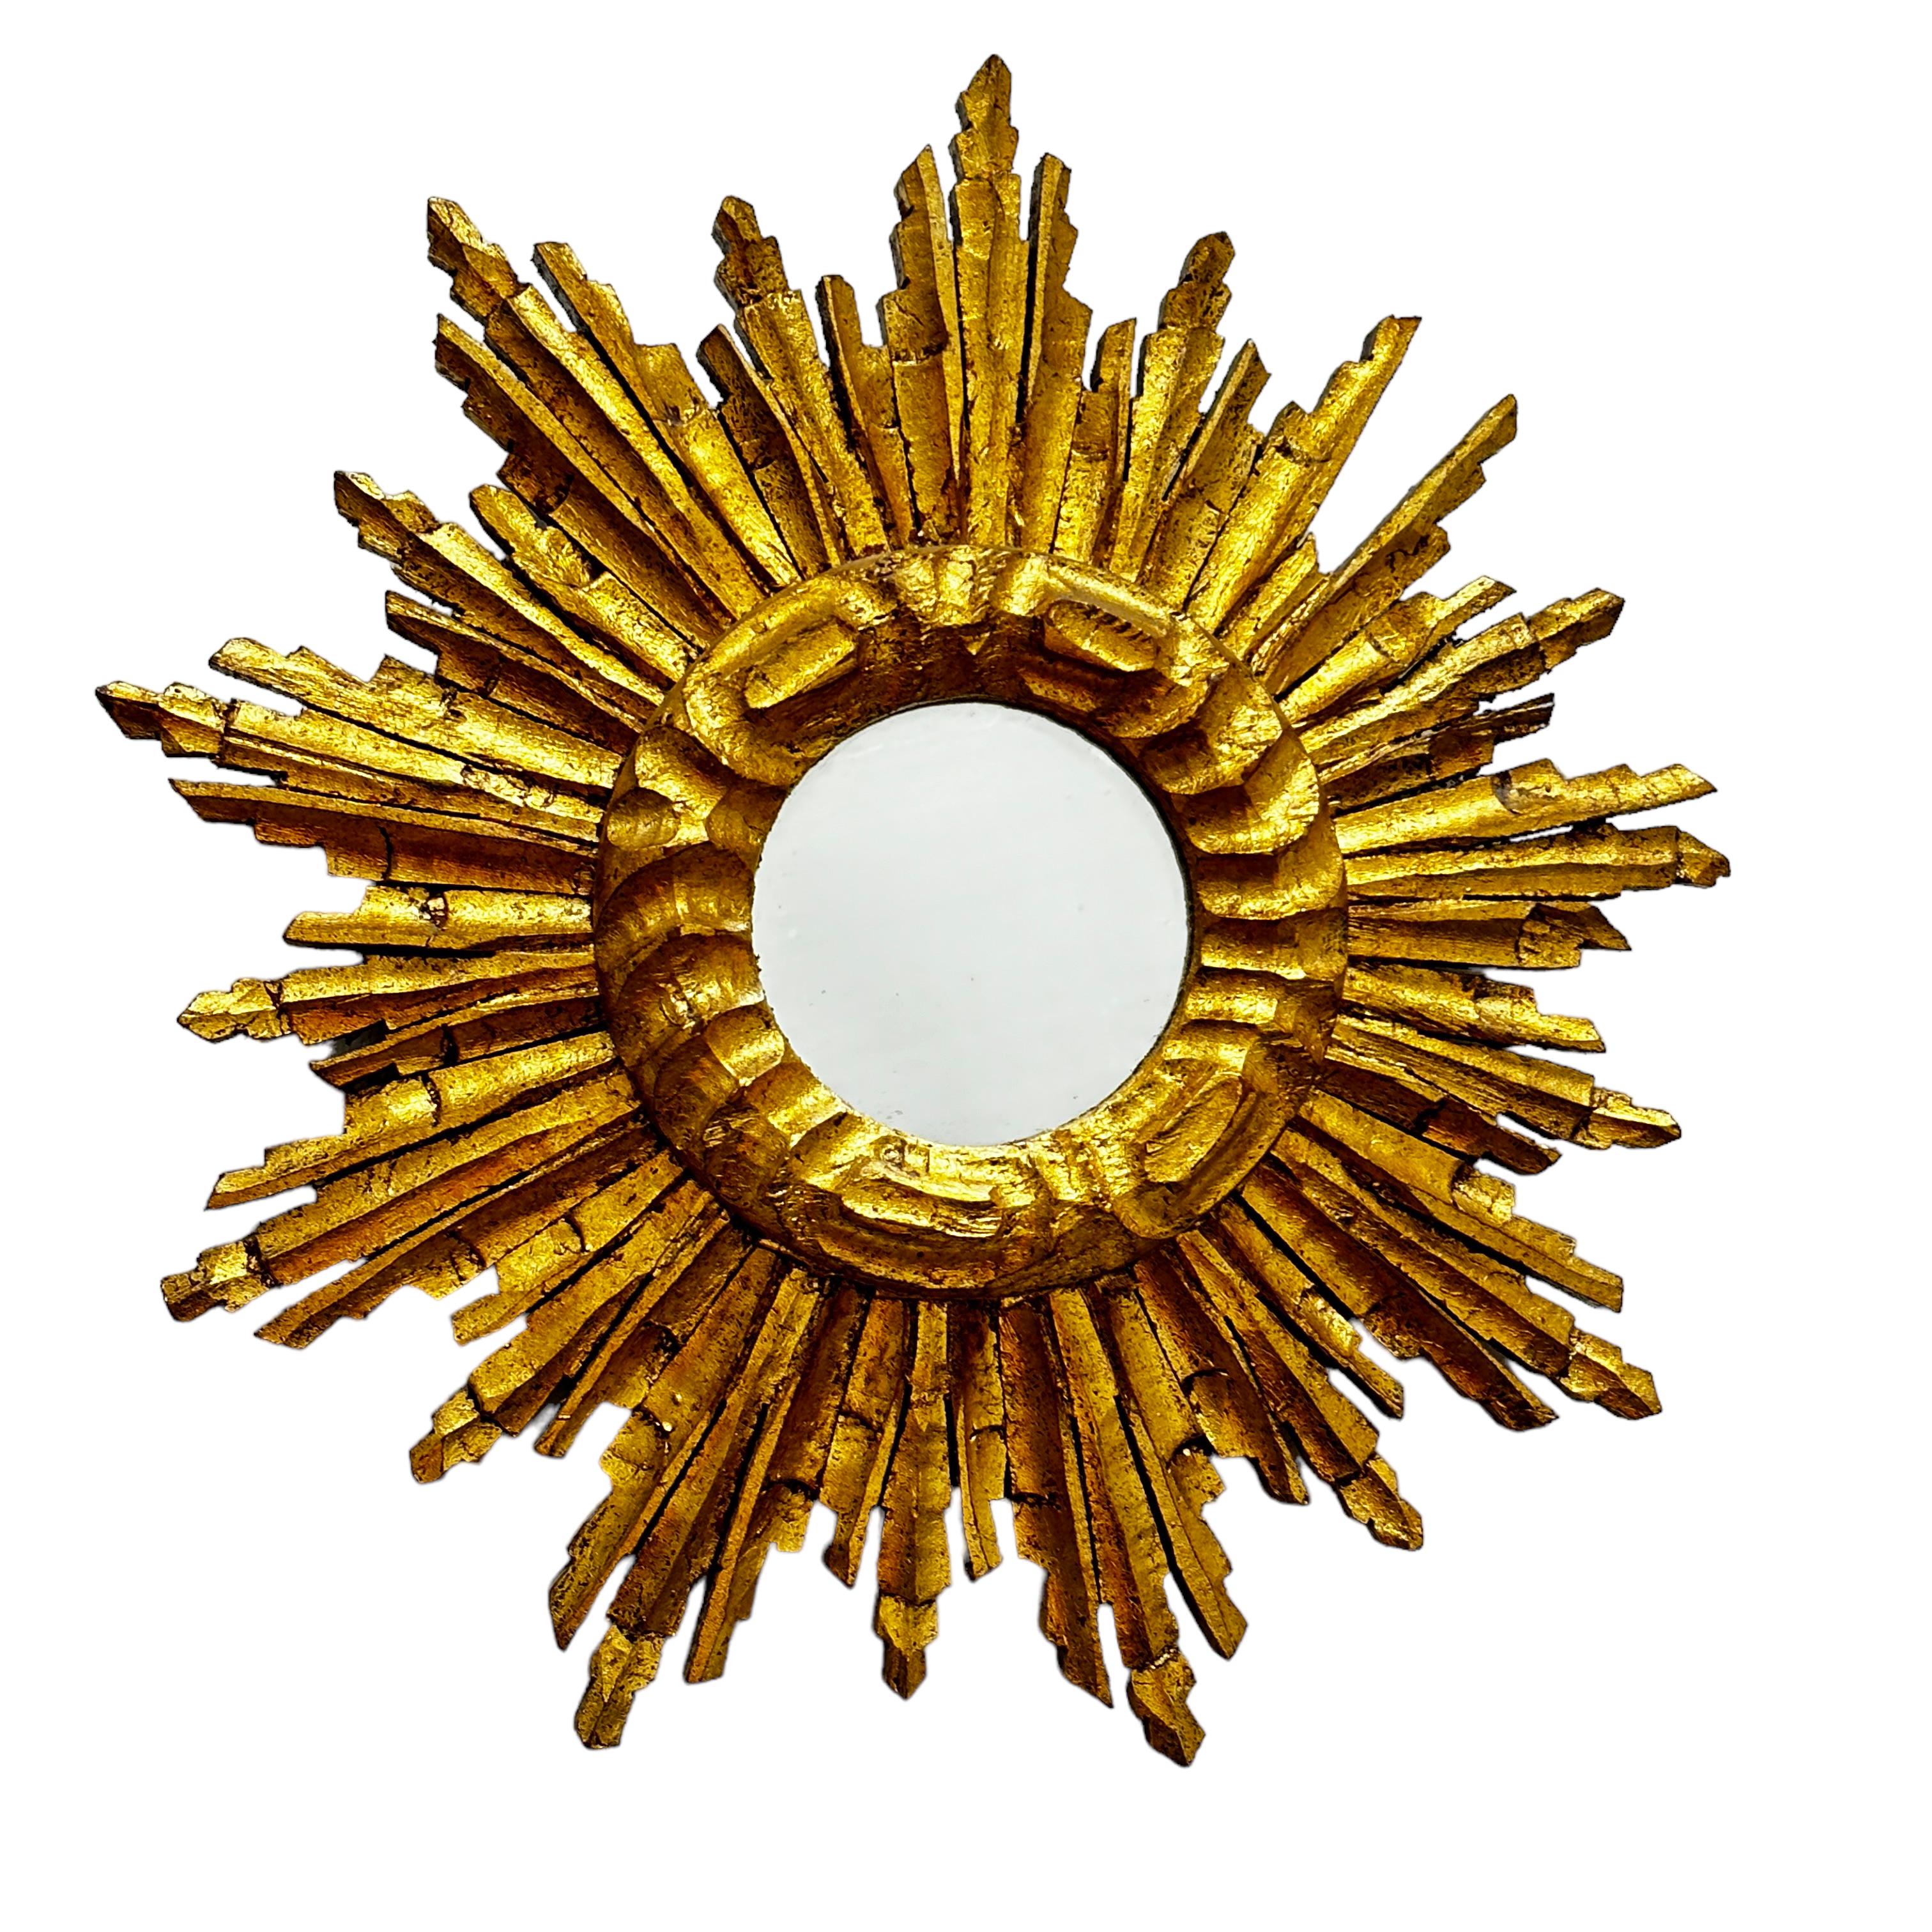 A gorgeous petite starburst mirror. Made of gilded wood. No chips, no cracks, no repairs. It measures approximate: 12.5